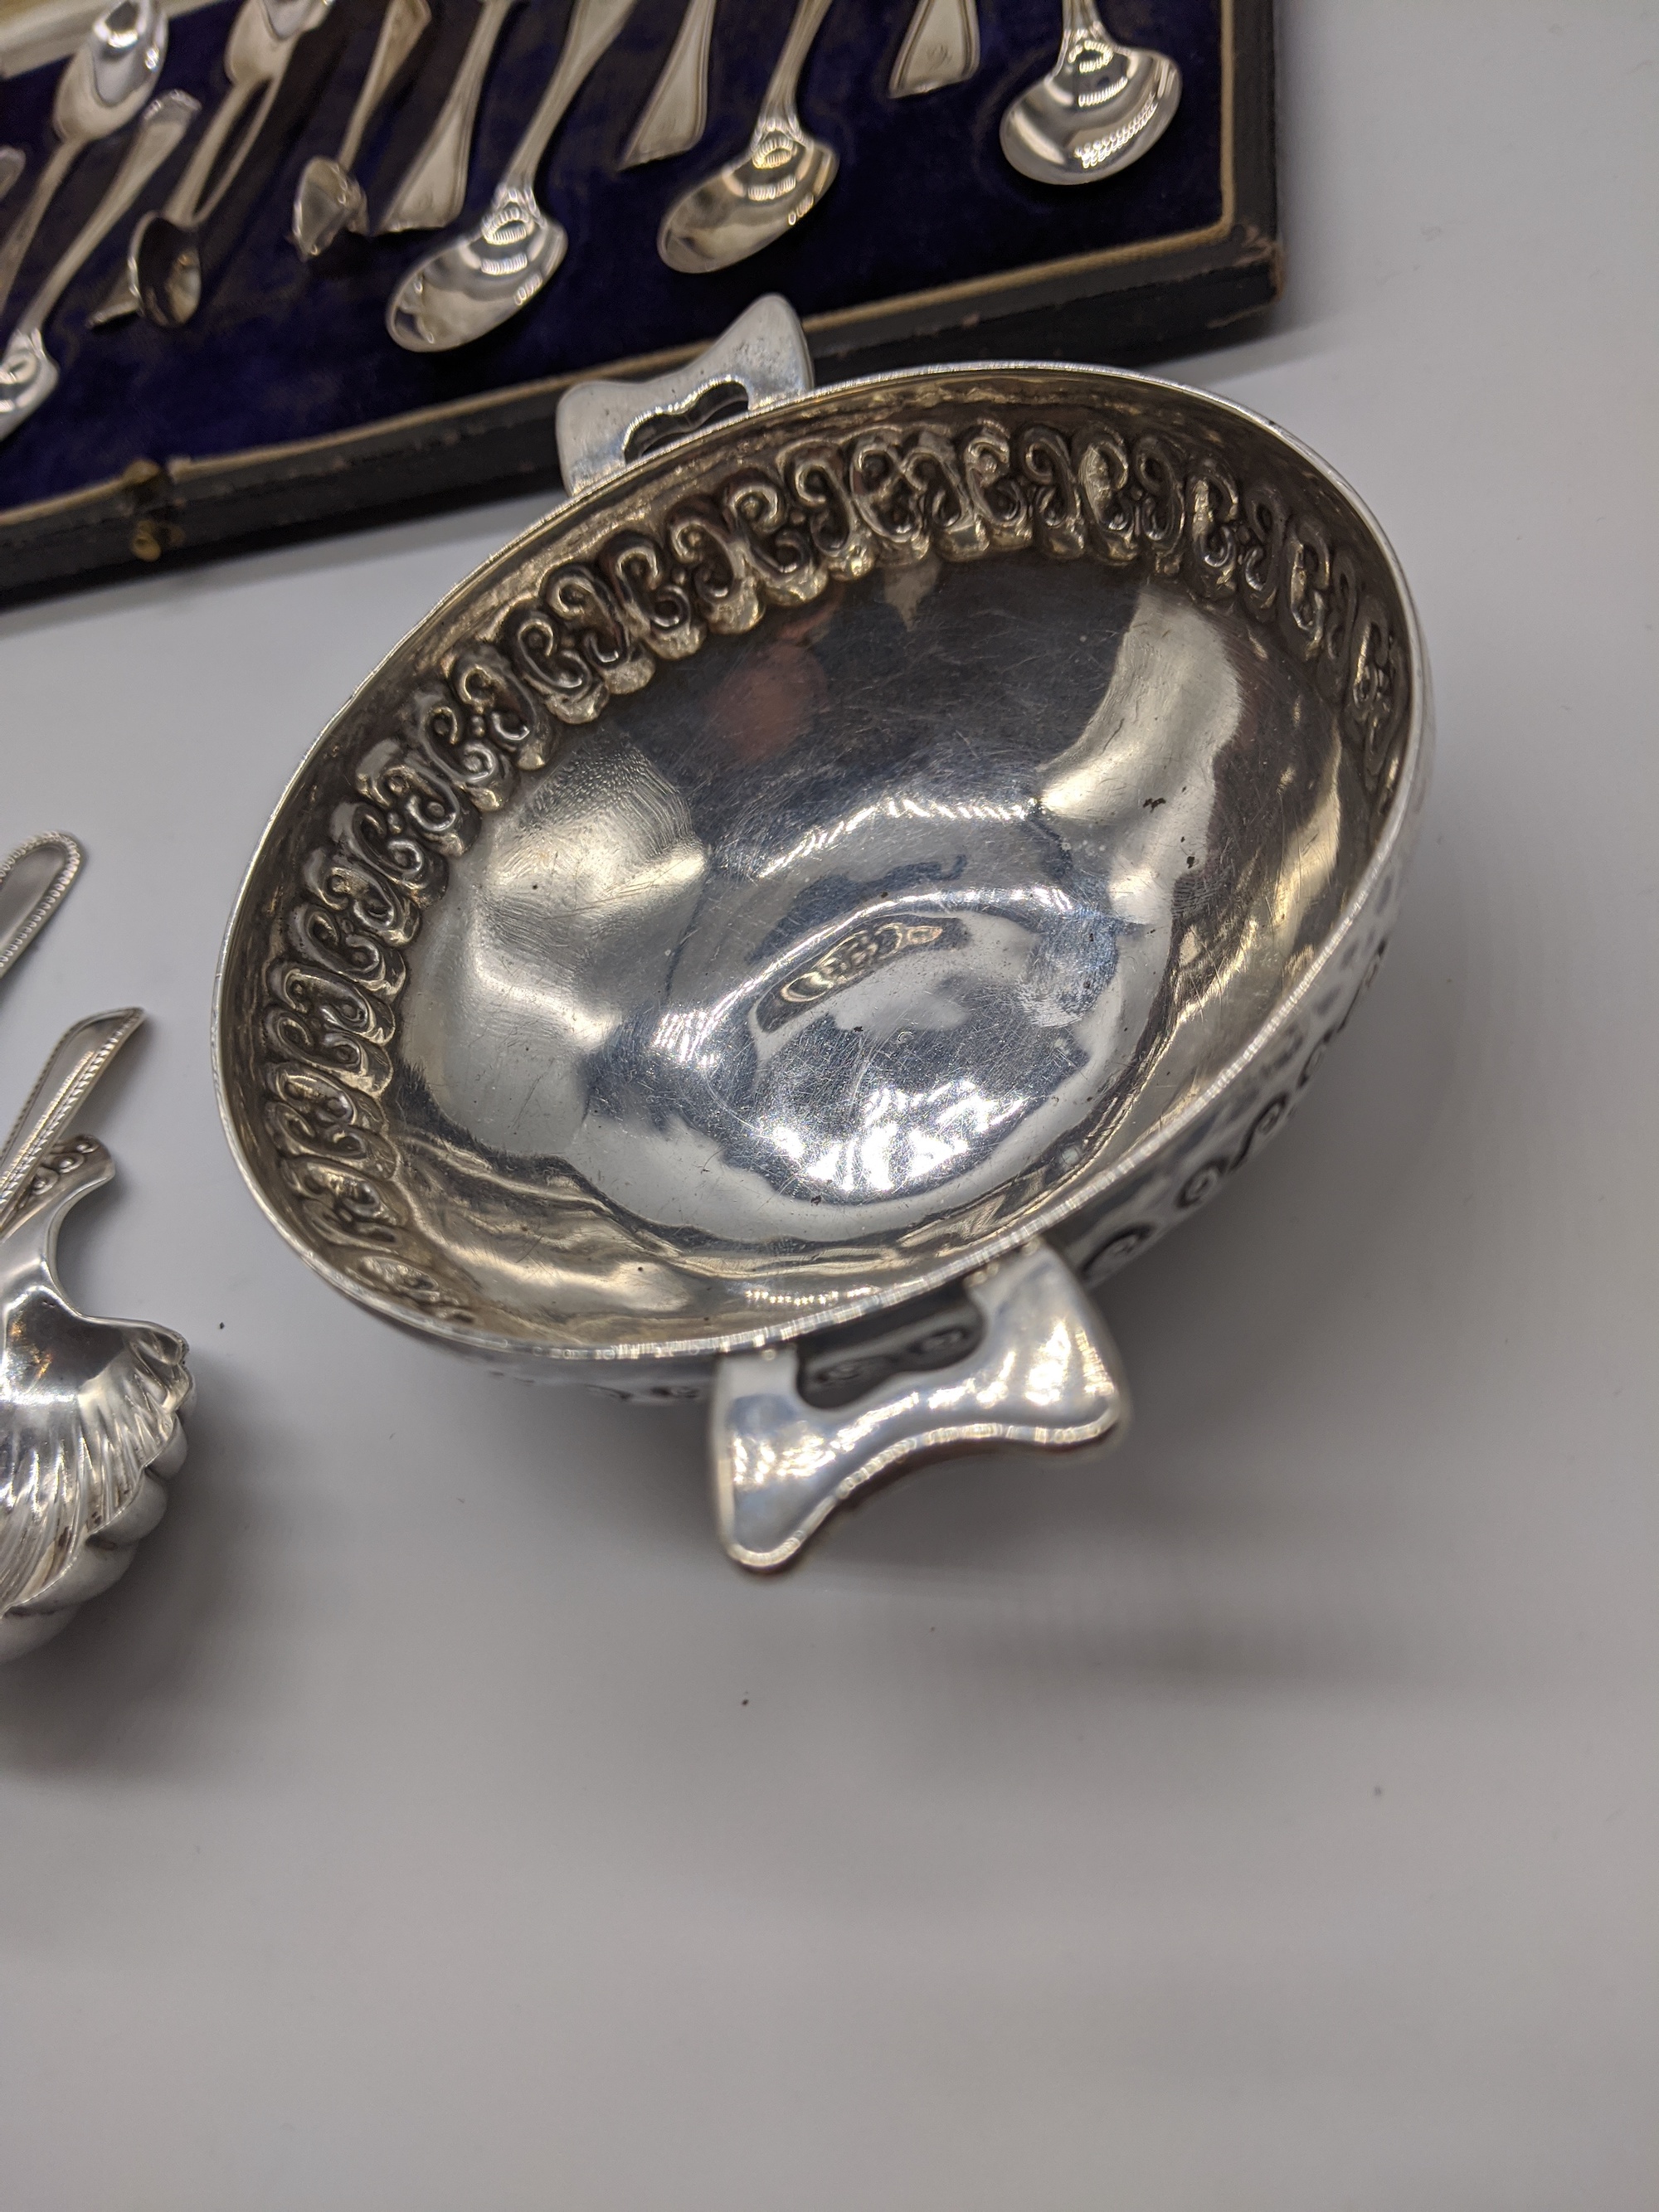 A collection of silver to include a cased set of 12 spoons (tongs not original), 6 teaspoons, a - Image 6 of 6